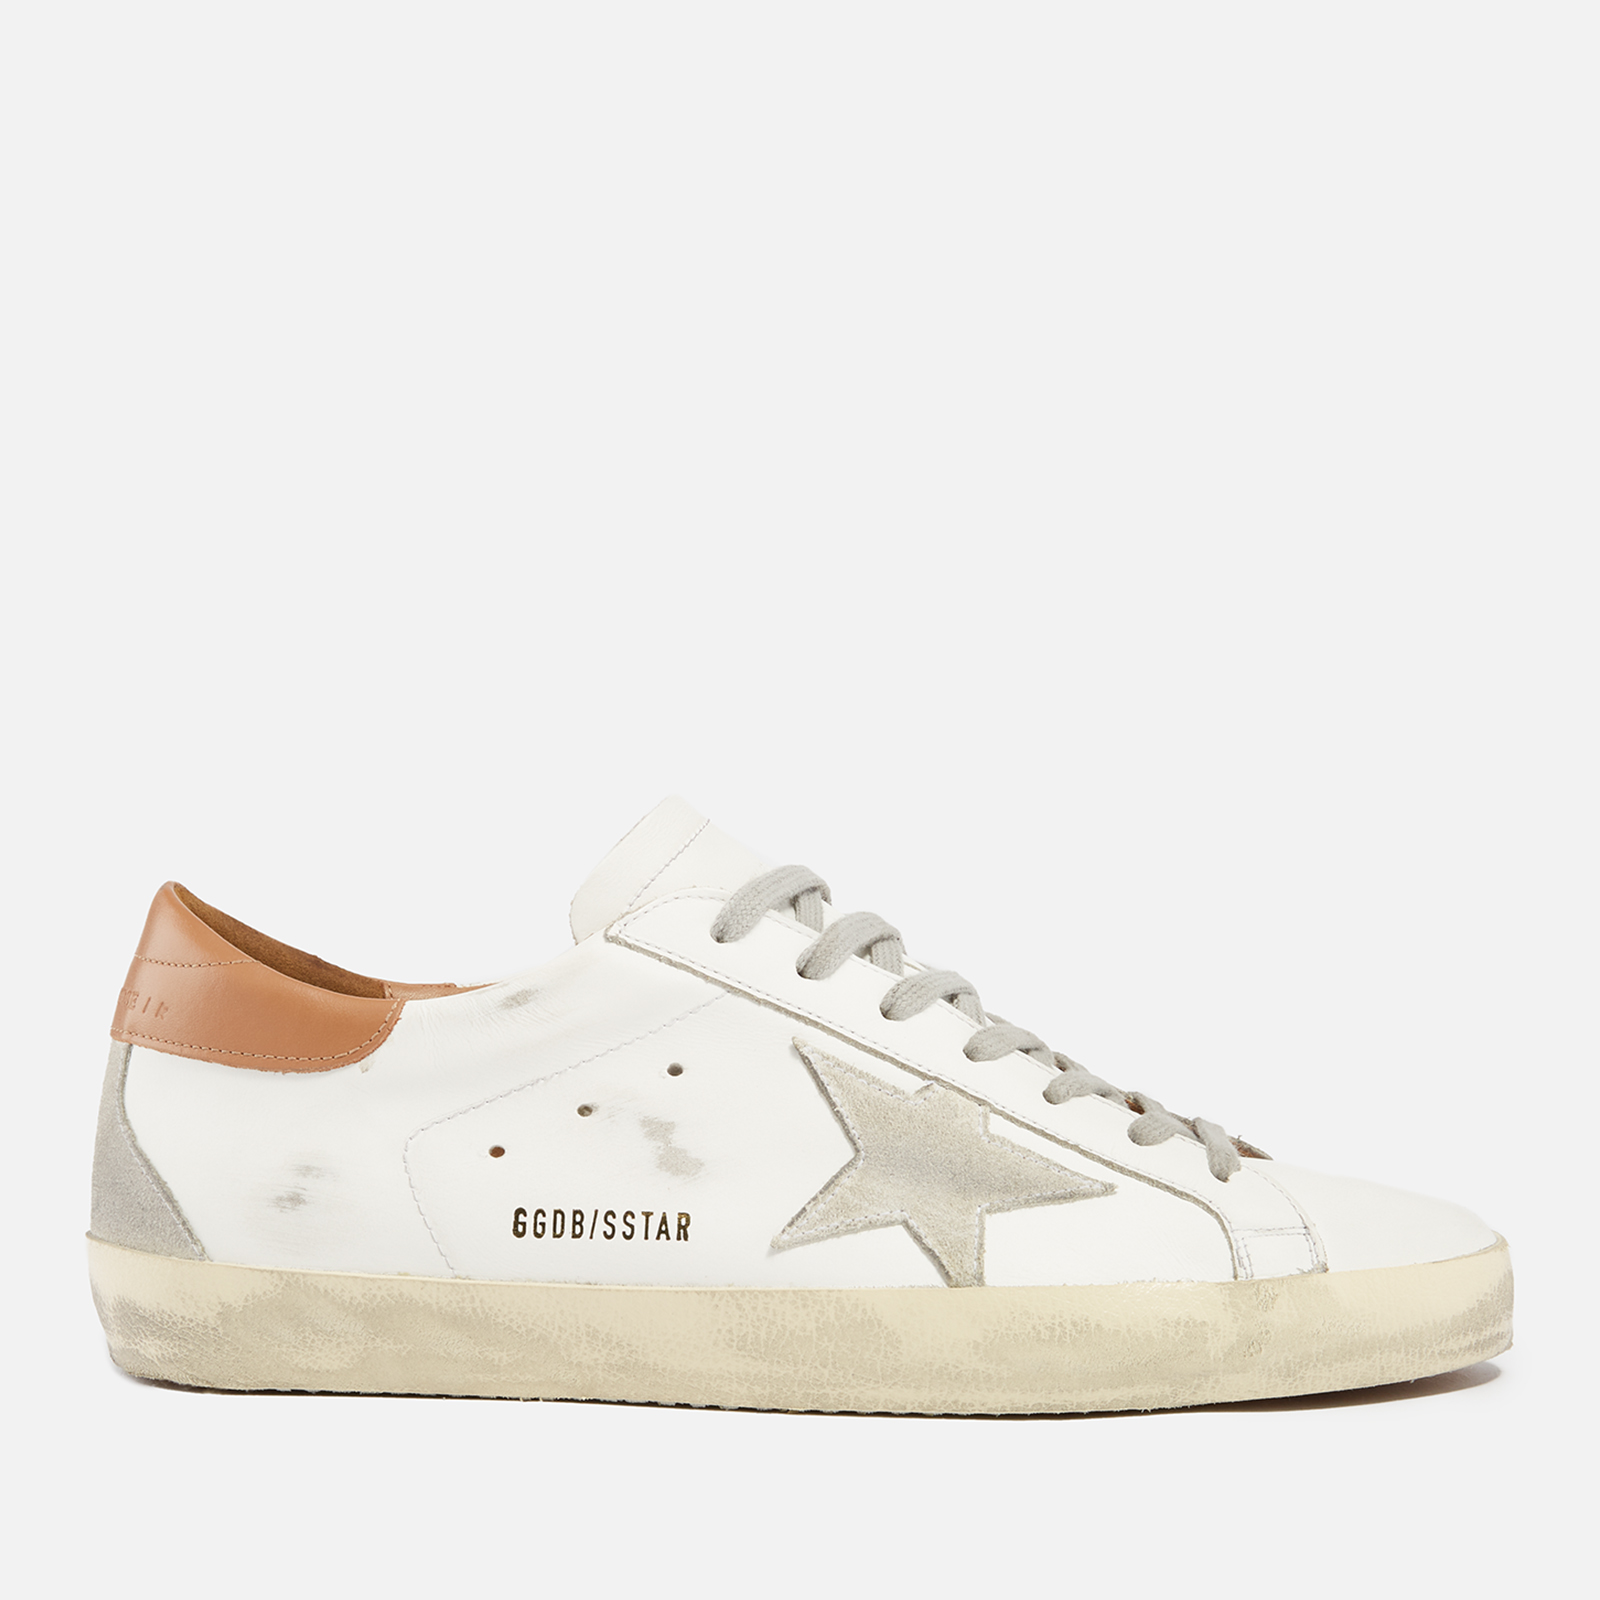 Golden Goose Men's Superstar Leather Trainers - White/Ice/Light Brown ...